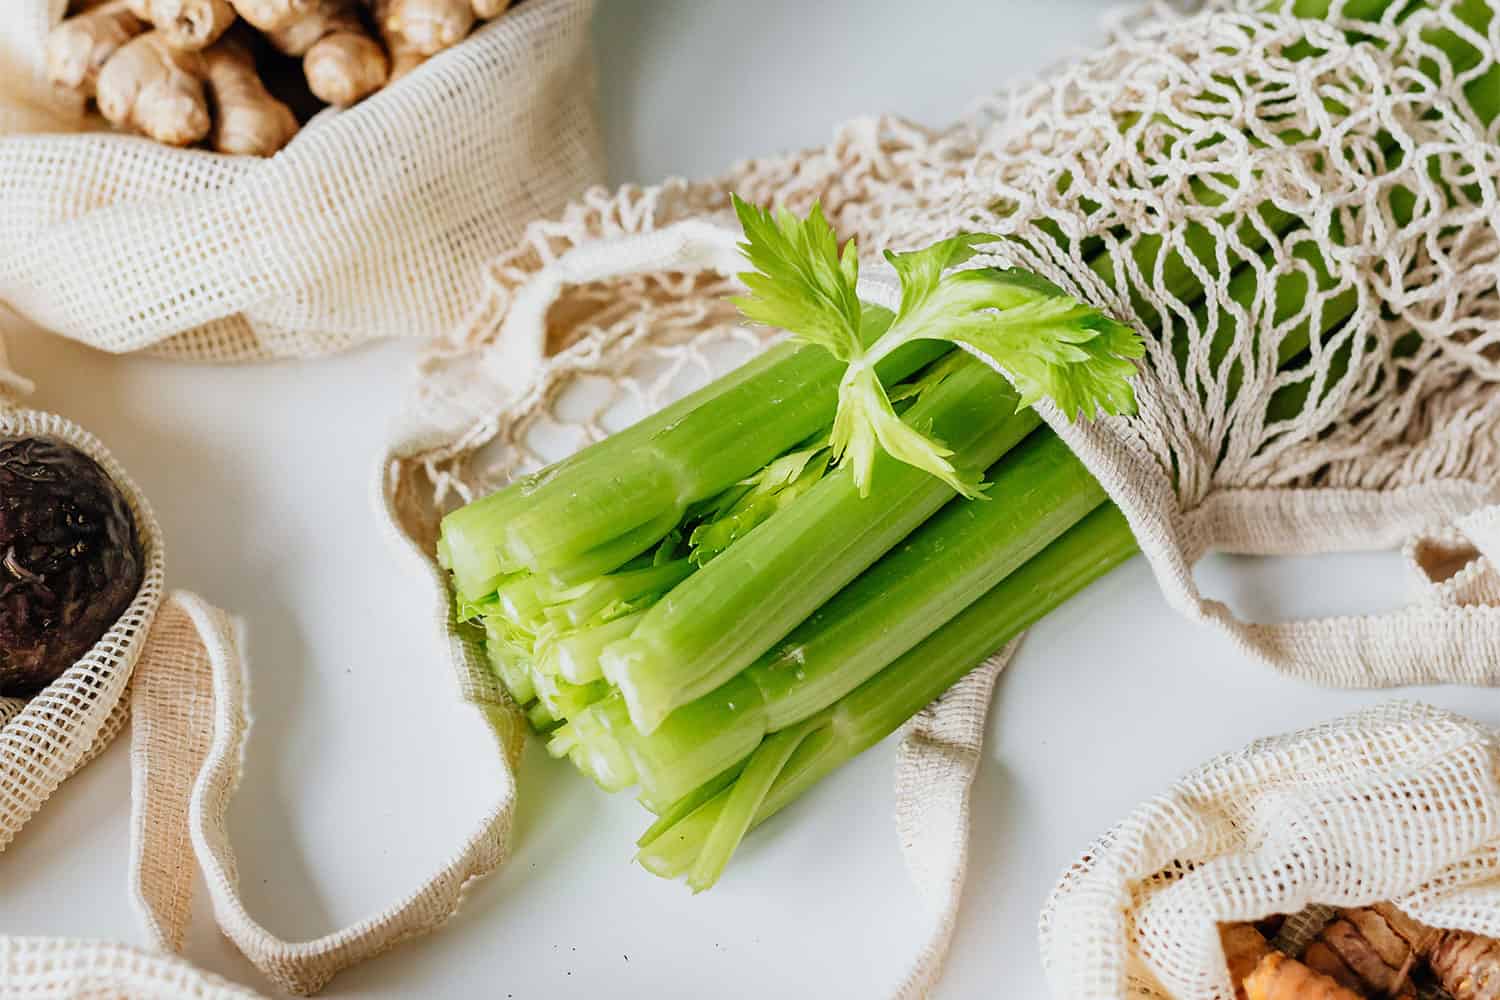 How To Store Celery To Keep It Fresh